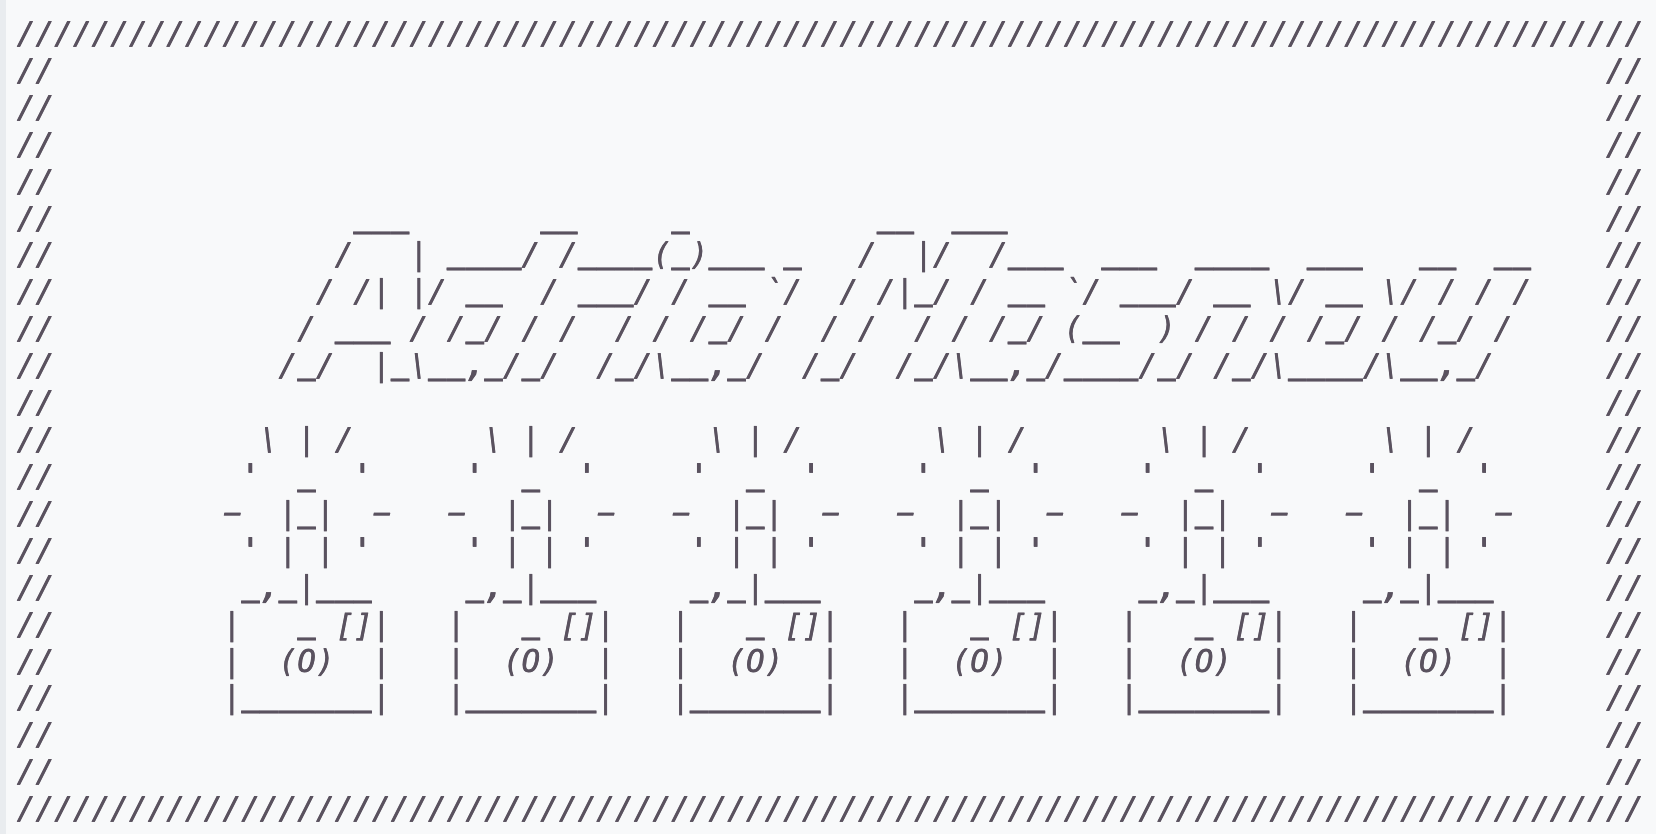 ASCII Signature from the contract